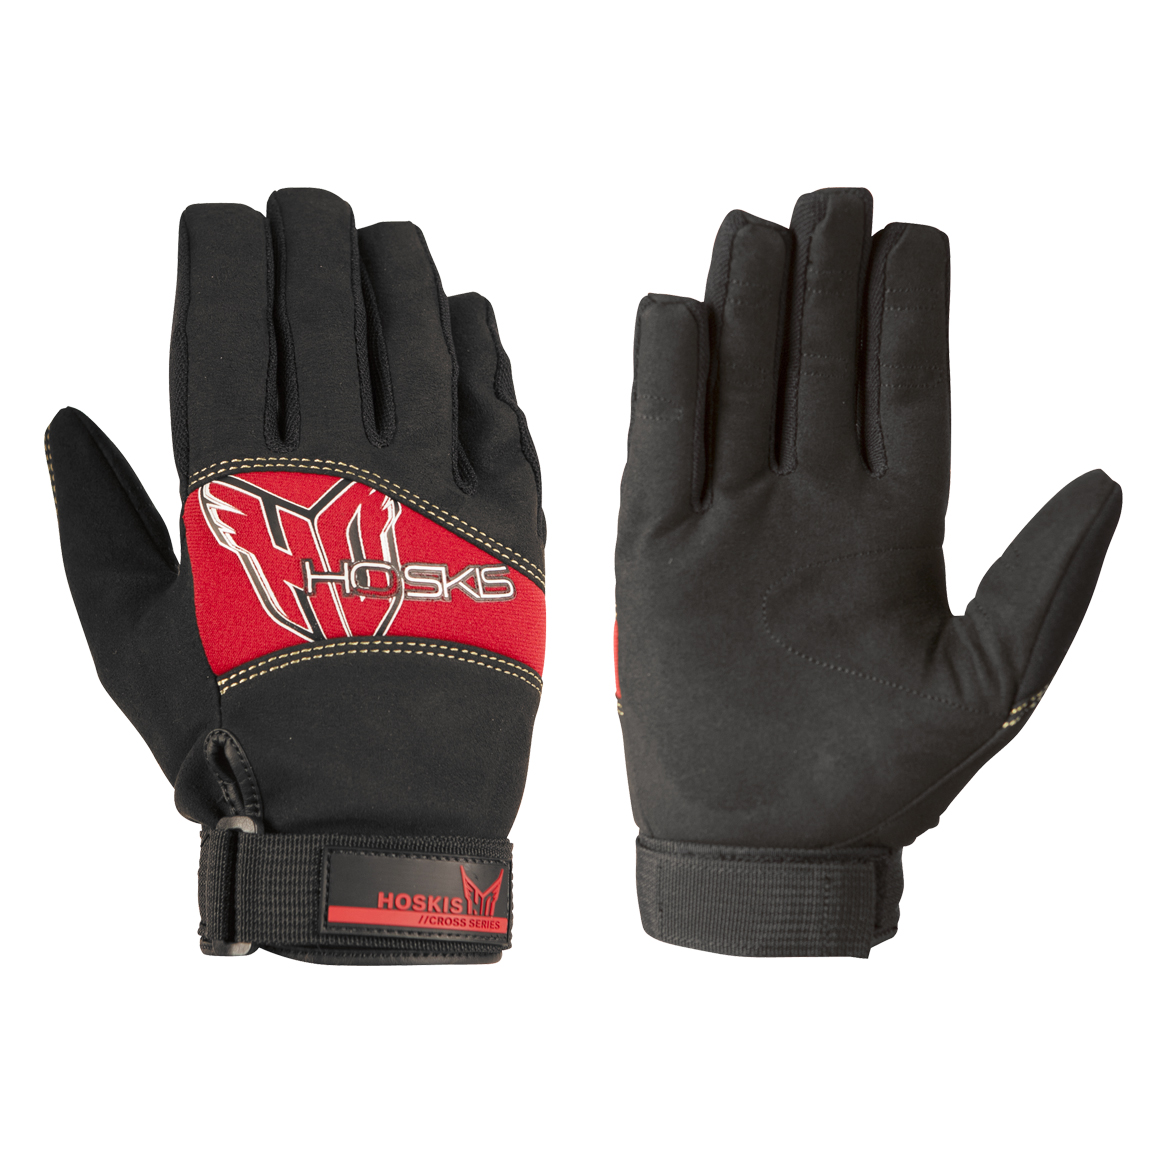 Syndicate Pro Grip Watersport Gloves